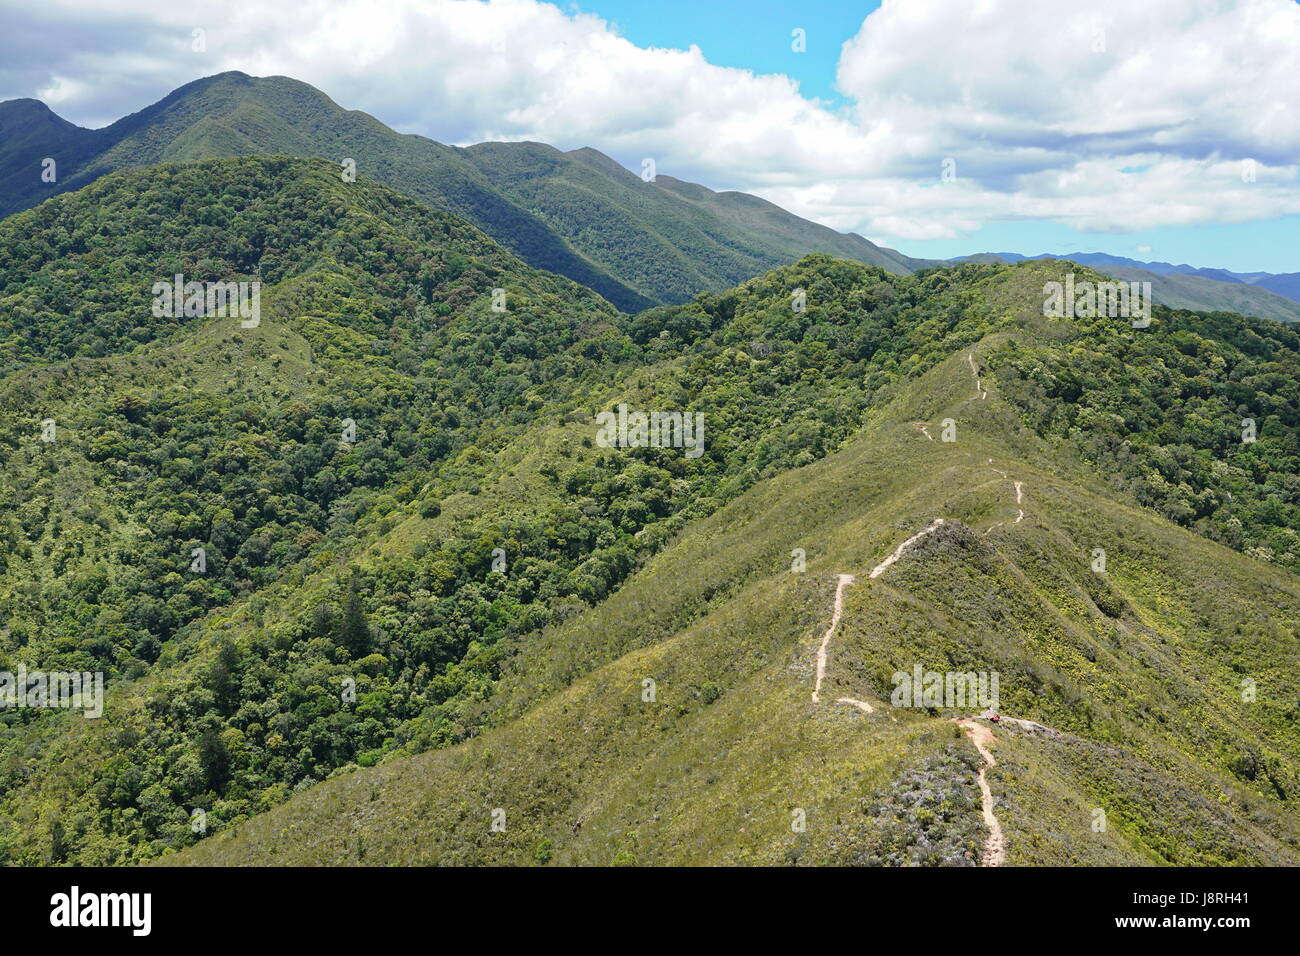 Mountain landscape in New Caledonia with a footpath along the crest and the mount Koghi on the left, Noumea, Grande Terre island, south Pacific Stock Photo